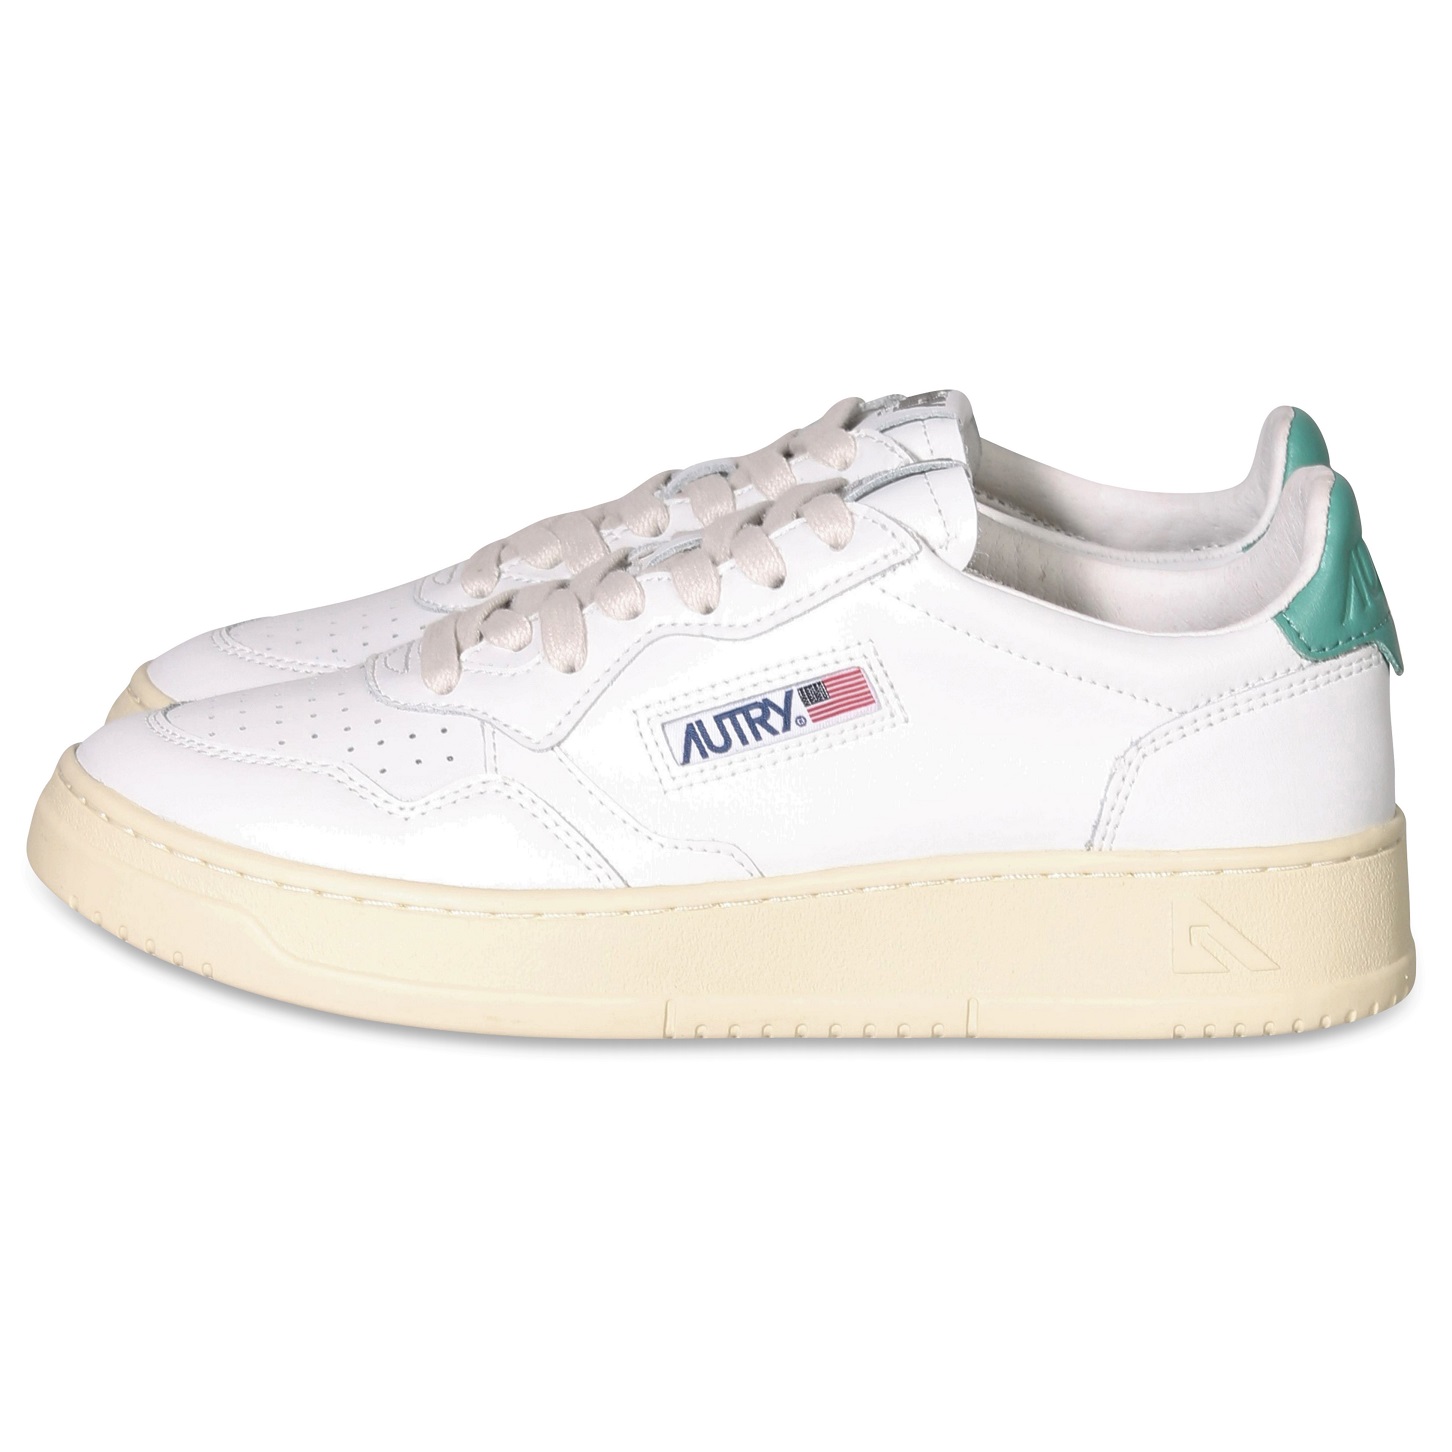 AUTRY ACTION SHOES Sneaker Low in White/Malachi Green 41